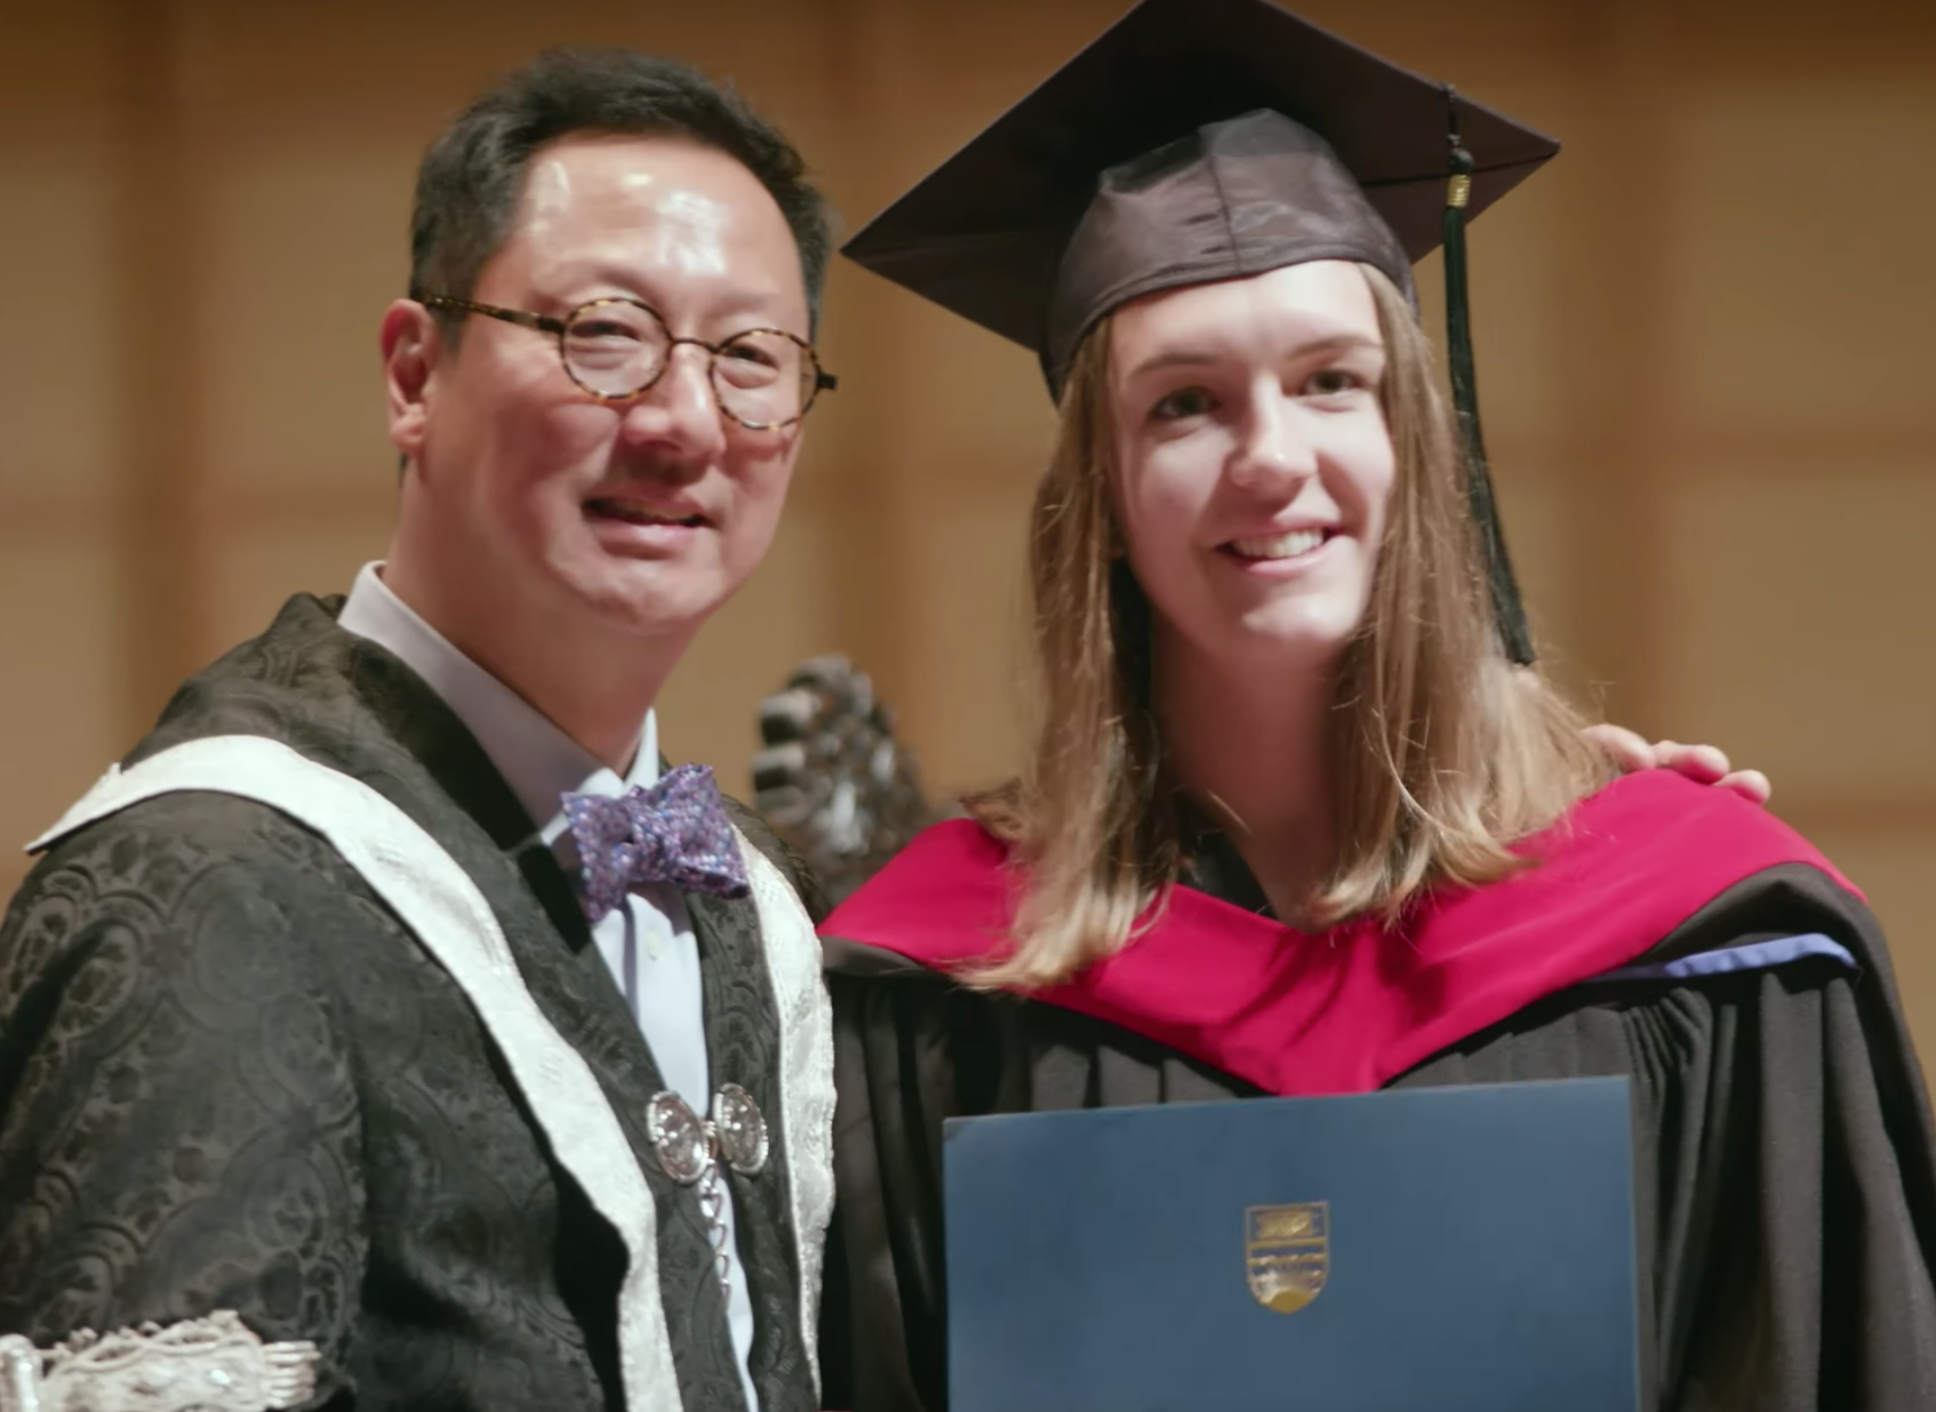 Behind the Scenes of Graduation at UBC